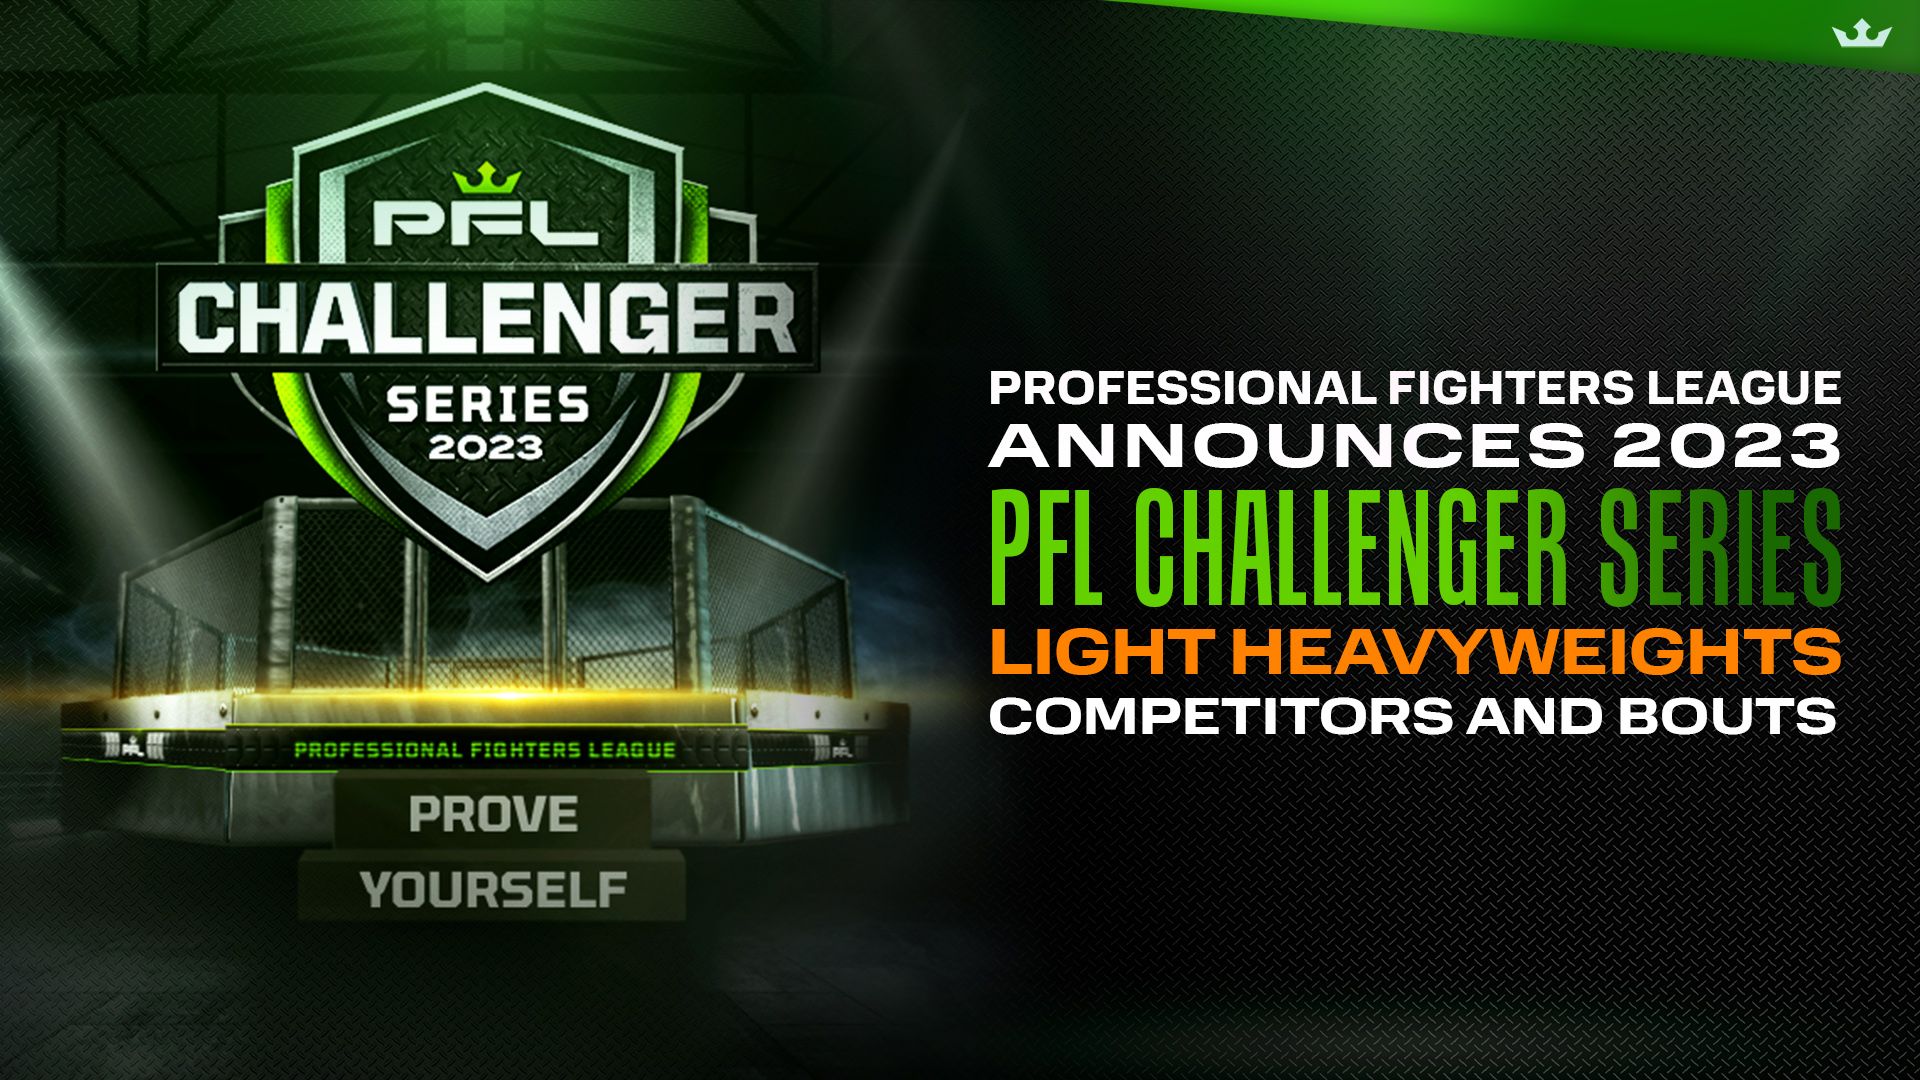 Light Heavyweights Get Their Date For The PFL Challenger Series